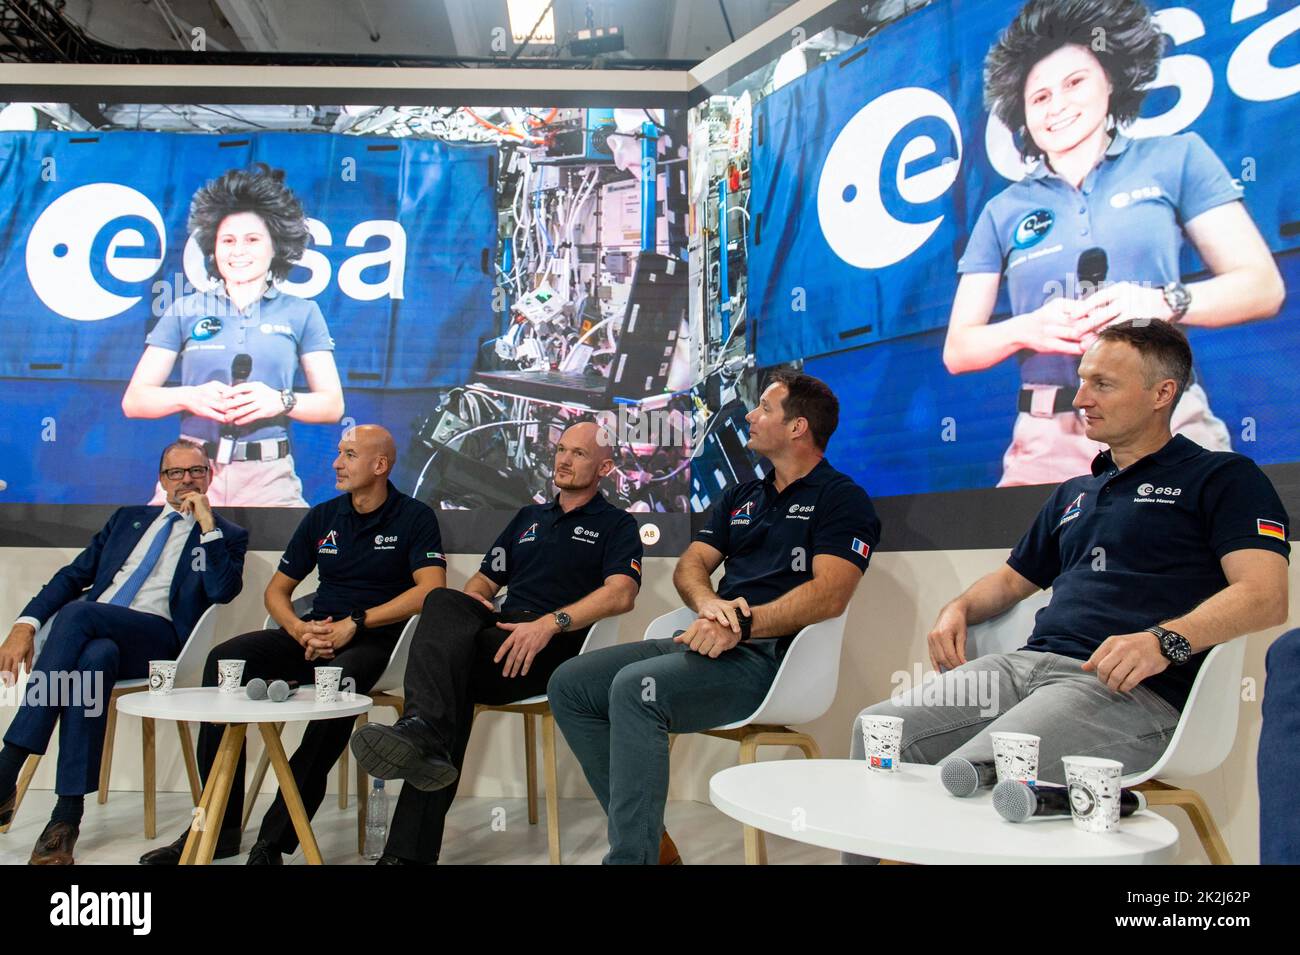 European Space Agency's astronauts Germany's Alexander Gerst (C), France's Thomas Pesquet (2ndR), Italy's Luca Parmitano (L) and Germany's Matthias Maurer (R) take part in a video conference with Italian astronaut Samantha Cristoforetti speaking from the International Space Station (ISS) during the 73rd International Astronautical Congress, held at the Paris Convention Centre in Paris, on September 21, 2022. Photo by Quentin Veuillet/ABACAPRESS.COM Stock Photo